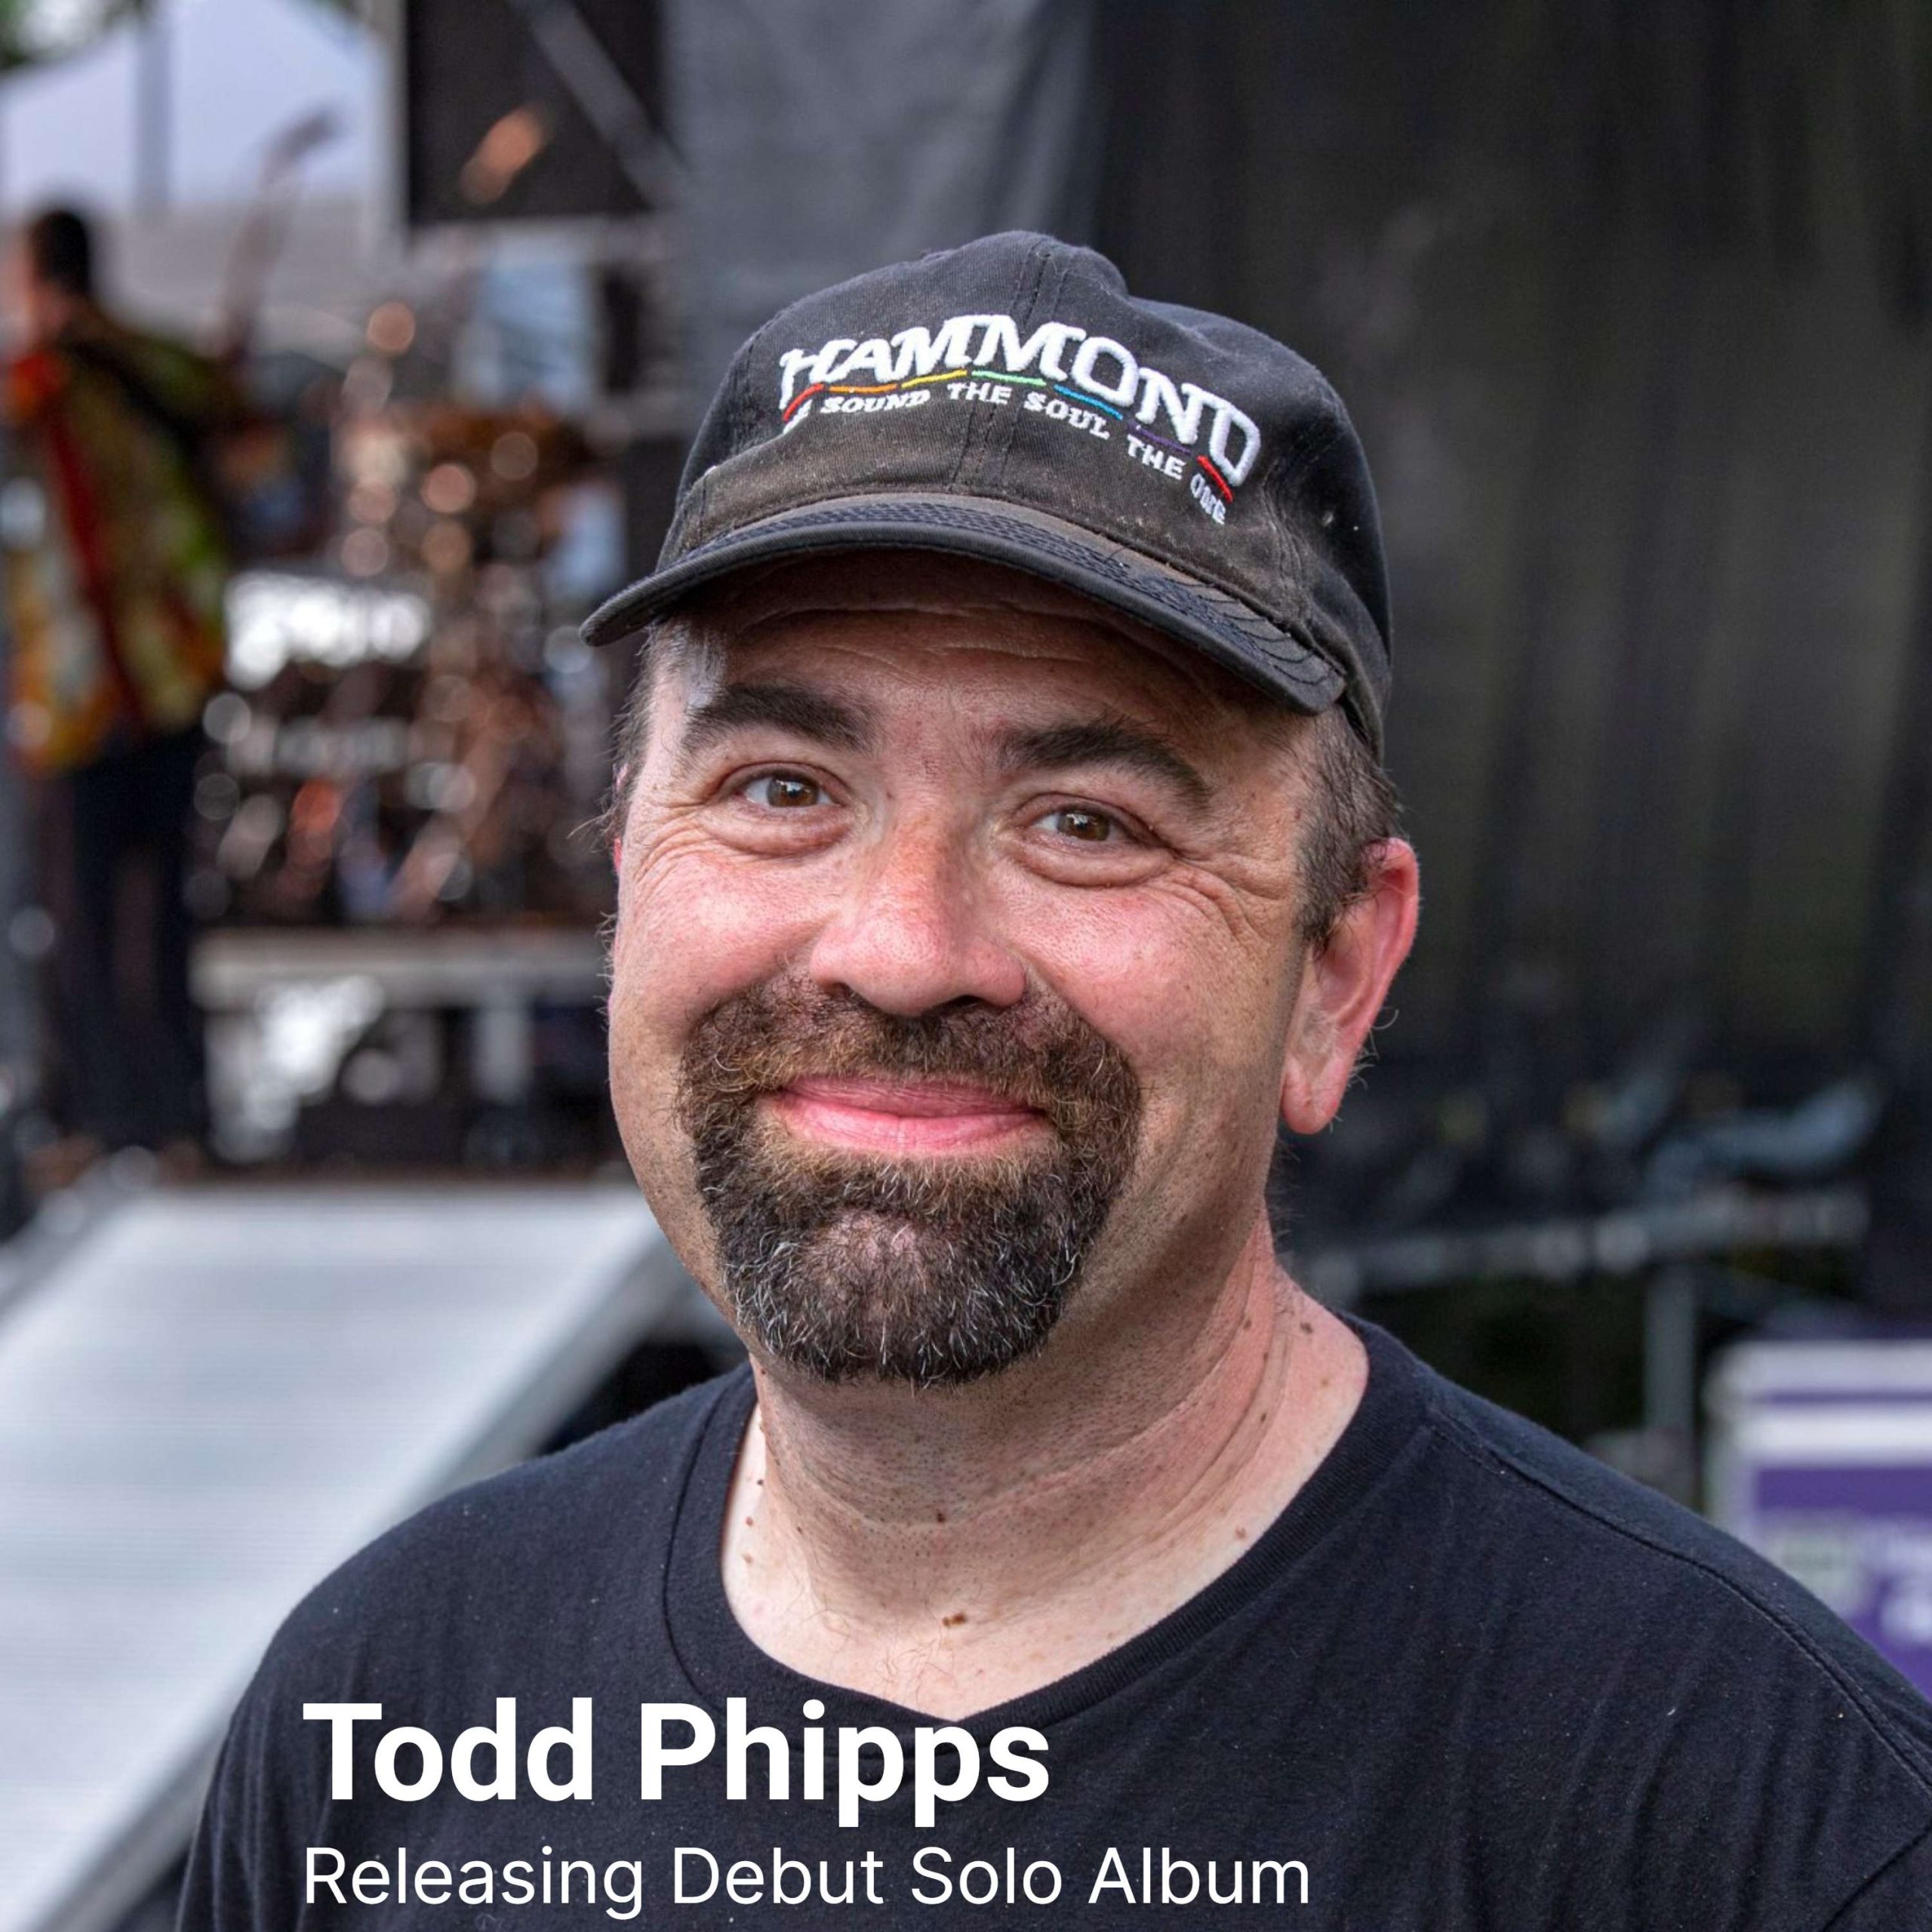 Todd Phipps photo by Alfred Davis